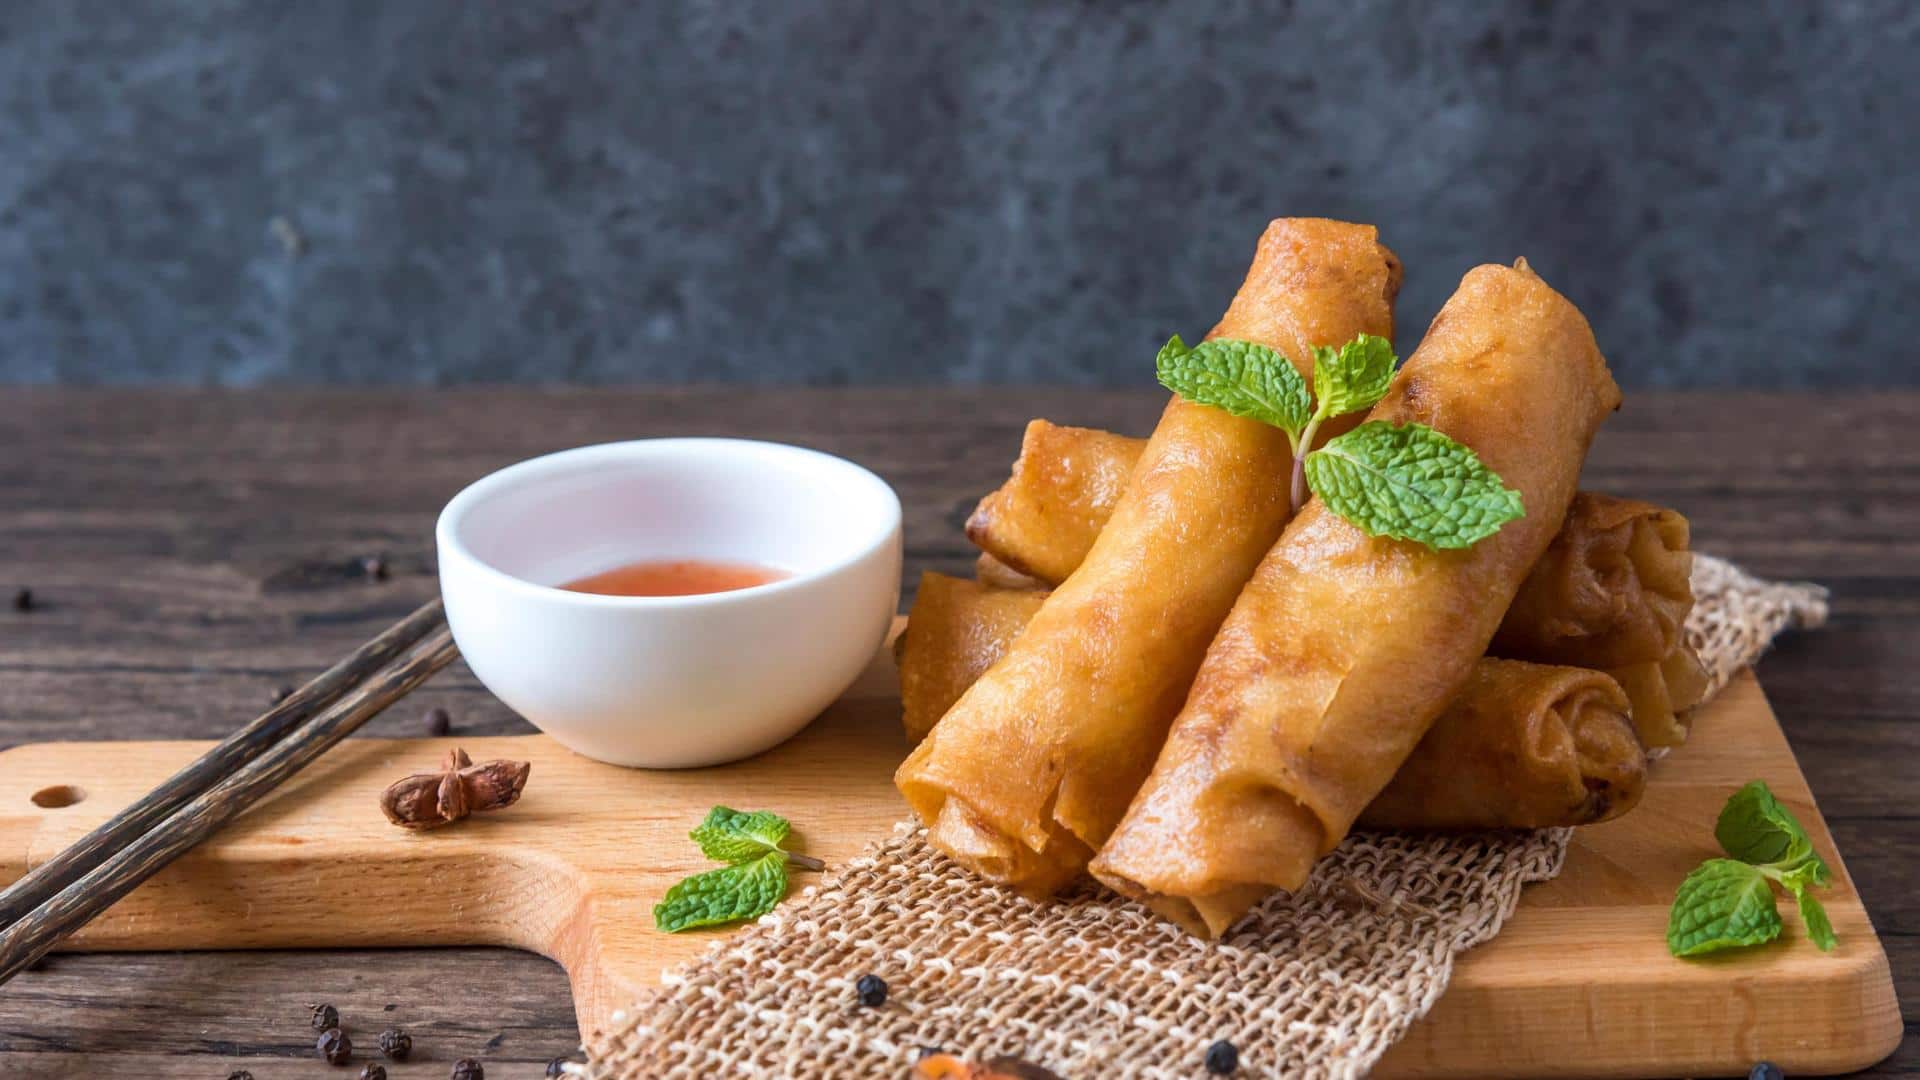 Roll into flavor: Easy spring roll recipes for home chefs 